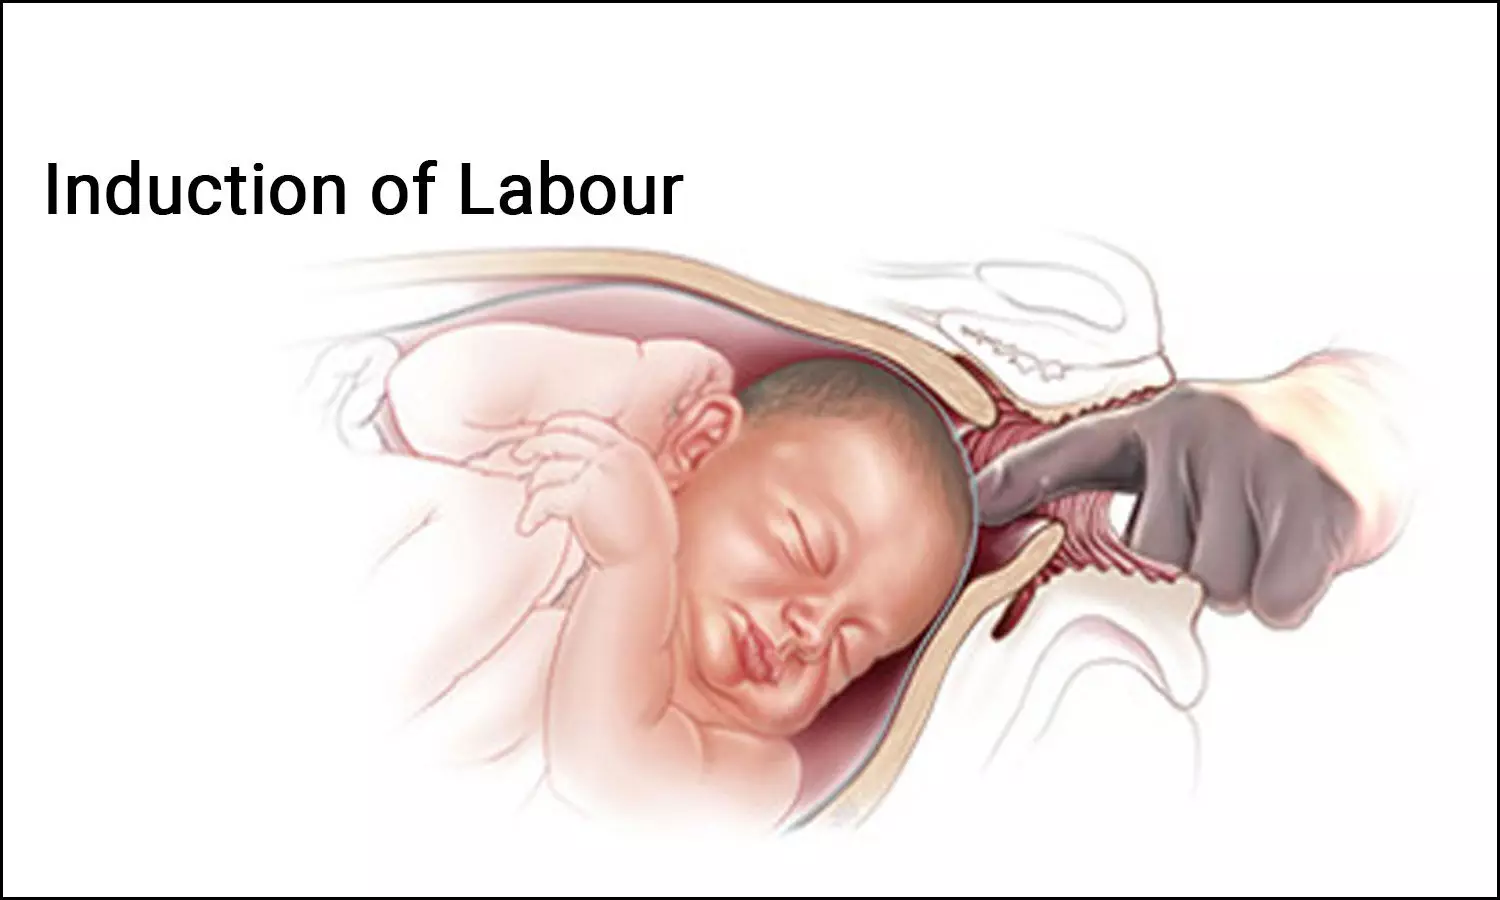 Is membrane sweeping a safe method for induction of labour?